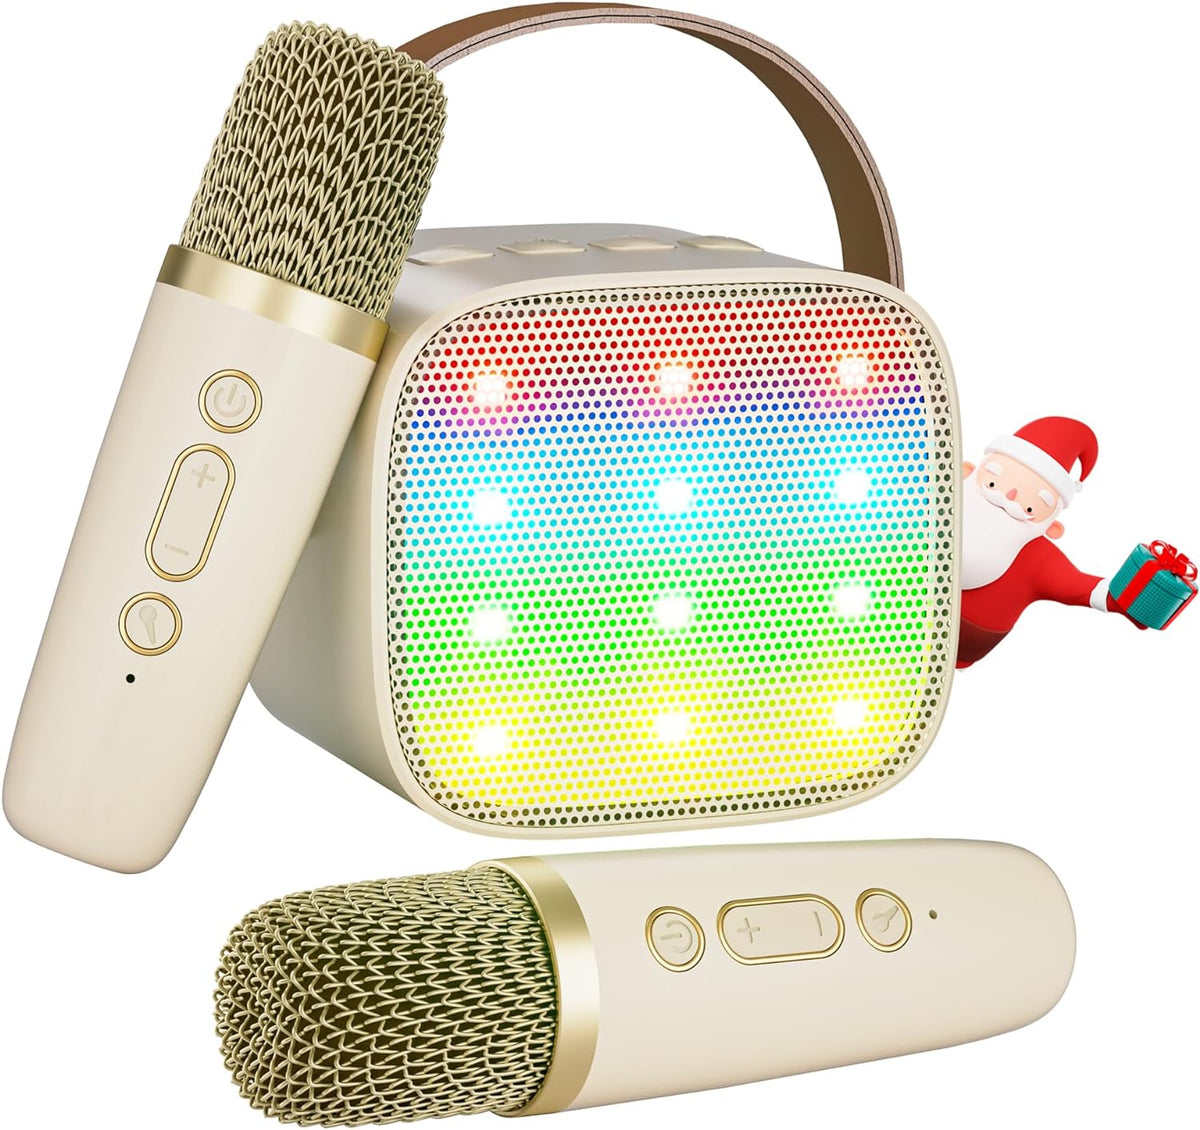 Kids Karaoke Machine, Kids Toys for Girls and Boys Gifts, Portable Bluetooth Speaker with 2 Wireless Microphone